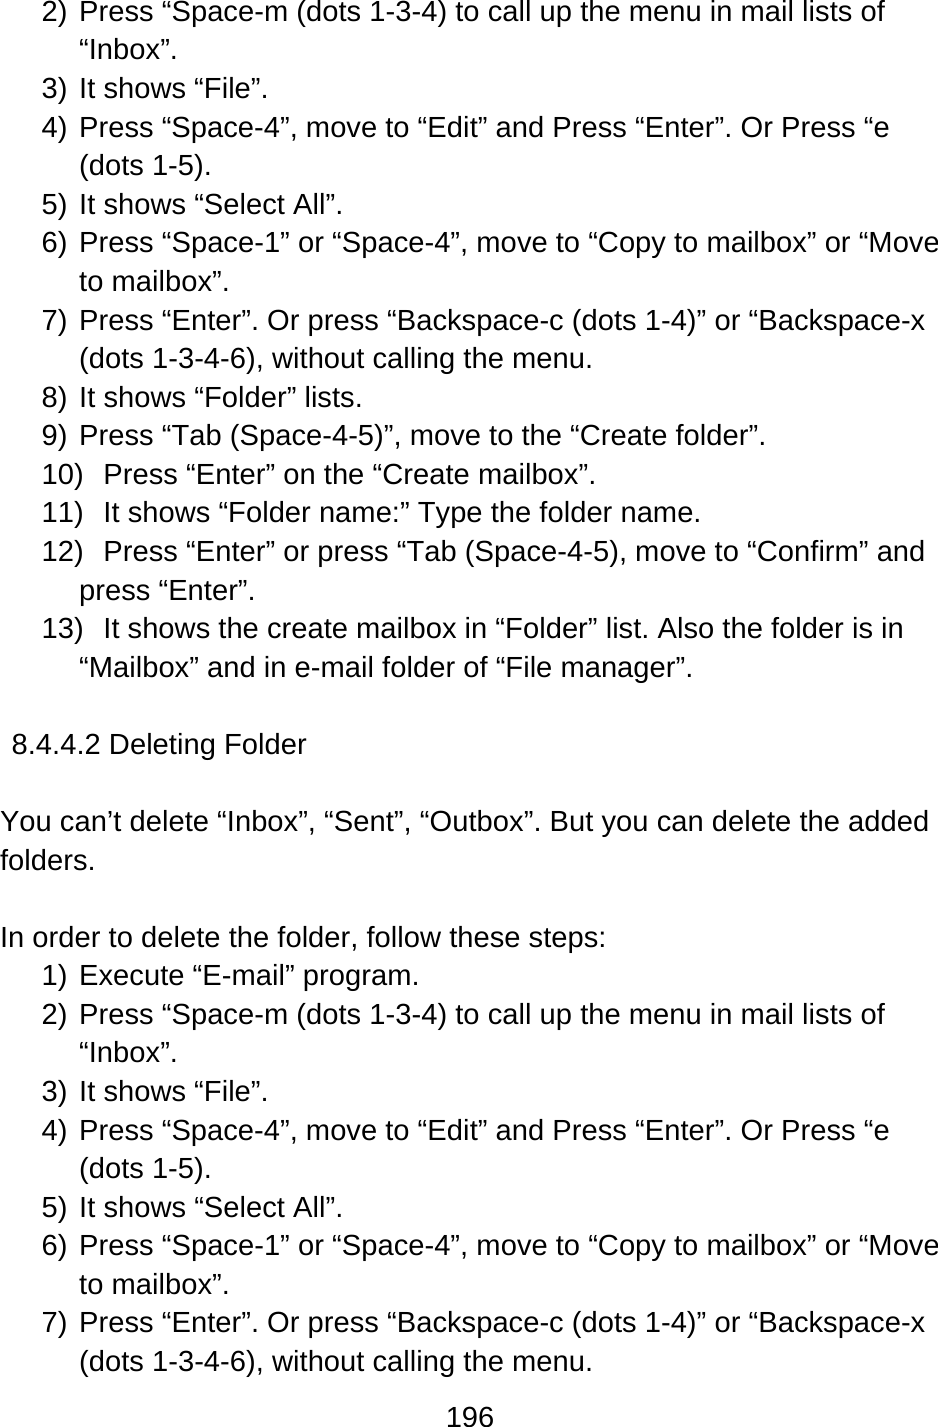 196  2) Press “Space-m (dots 1-3-4) to call up the menu in mail lists of “Inbox”. 3) It shows “File”. 4) Press “Space-4”, move to “Edit” and Press “Enter”. Or Press “e (dots 1-5). 5) It shows “Select All”. 6) Press “Space-1” or “Space-4”, move to “Copy to mailbox” or “Move to mailbox”.   7) Press “Enter”. Or press “Backspace-c (dots 1-4)” or “Backspace-x (dots 1-3-4-6), without calling the menu. 8) It shows “Folder” lists. 9) Press “Tab (Space-4-5)”, move to the “Create folder”. 10)  Press “Enter” on the “Create mailbox”. 11)  It shows “Folder name:” Type the folder name. 12)  Press “Enter” or press “Tab (Space-4-5), move to “Confirm” and press “Enter”. 13)  It shows the create mailbox in “Folder” list. Also the folder is in “Mailbox” and in e-mail folder of “File manager”.  8.4.4.2 Deleting Folder  You can’t delete “Inbox”, “Sent”, “Outbox”. But you can delete the added folders.  In order to delete the folder, follow these steps: 1) Execute “E-mail” program. 2) Press “Space-m (dots 1-3-4) to call up the menu in mail lists of “Inbox”. 3) It shows “File”. 4) Press “Space-4”, move to “Edit” and Press “Enter”. Or Press “e (dots 1-5). 5) It shows “Select All”. 6) Press “Space-1” or “Space-4”, move to “Copy to mailbox” or “Move to mailbox”.   7) Press “Enter”. Or press “Backspace-c (dots 1-4)” or “Backspace-x (dots 1-3-4-6), without calling the menu. 